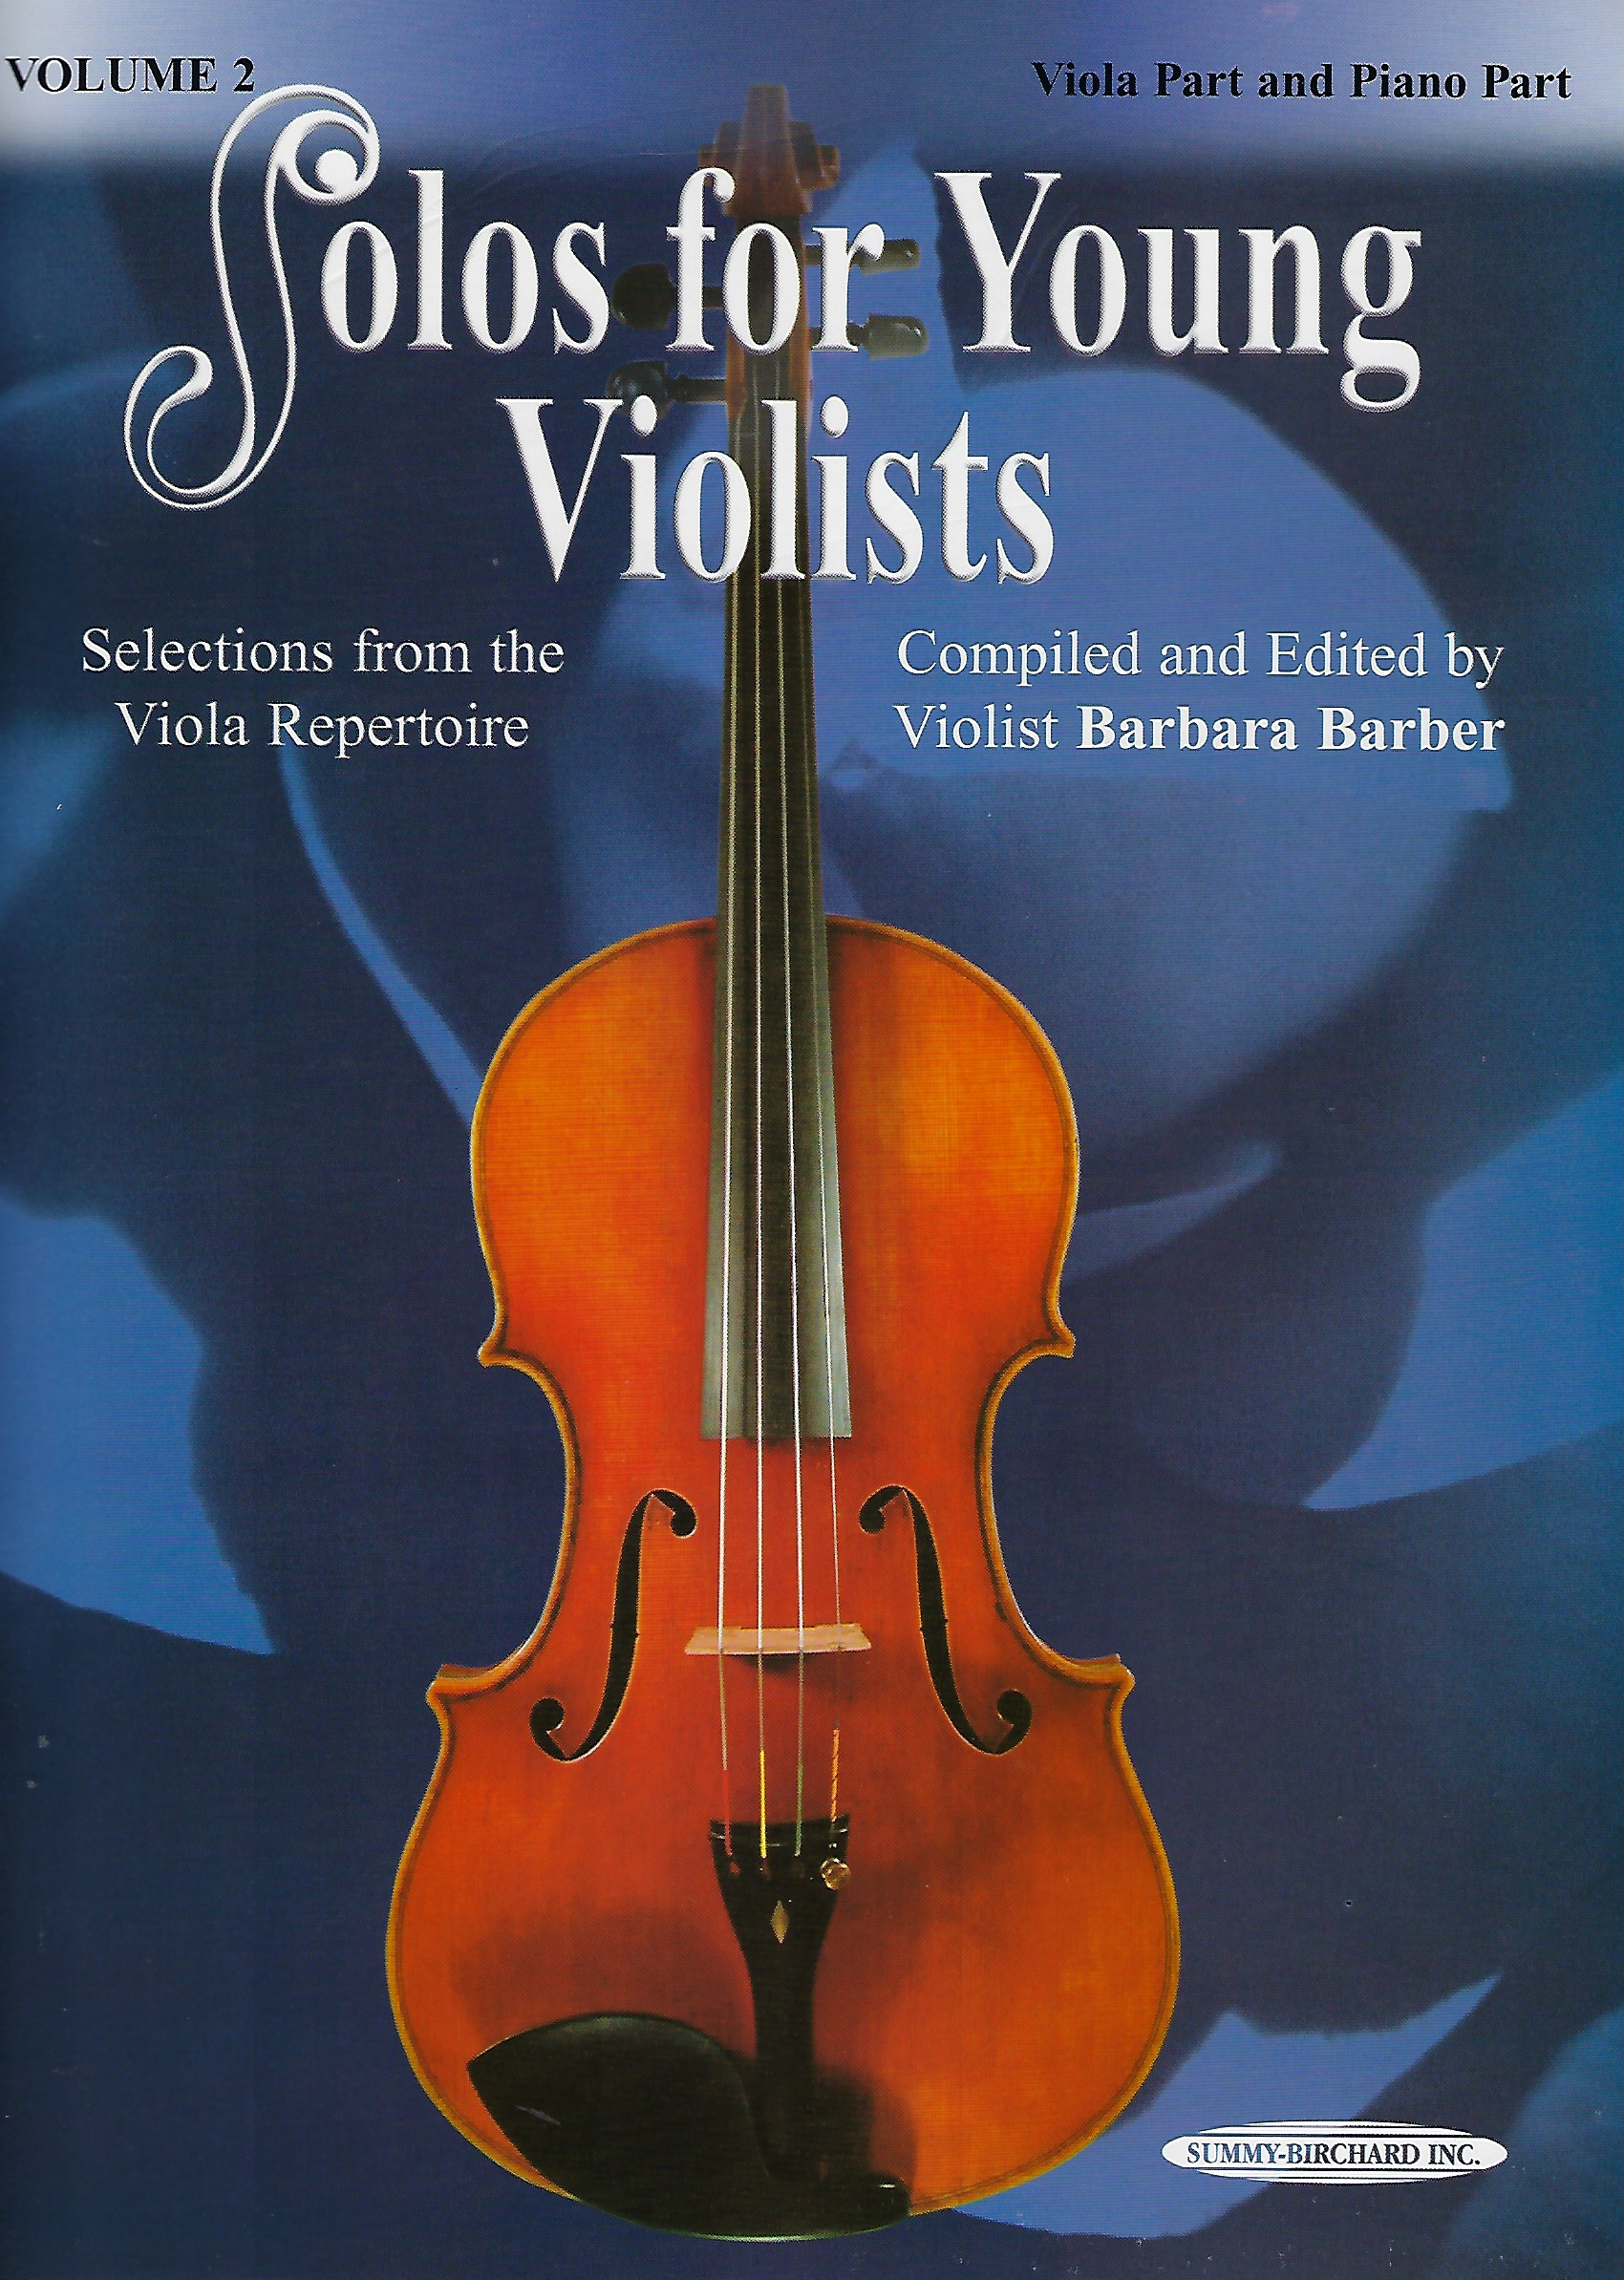 Solos for Young Violists vol. 2